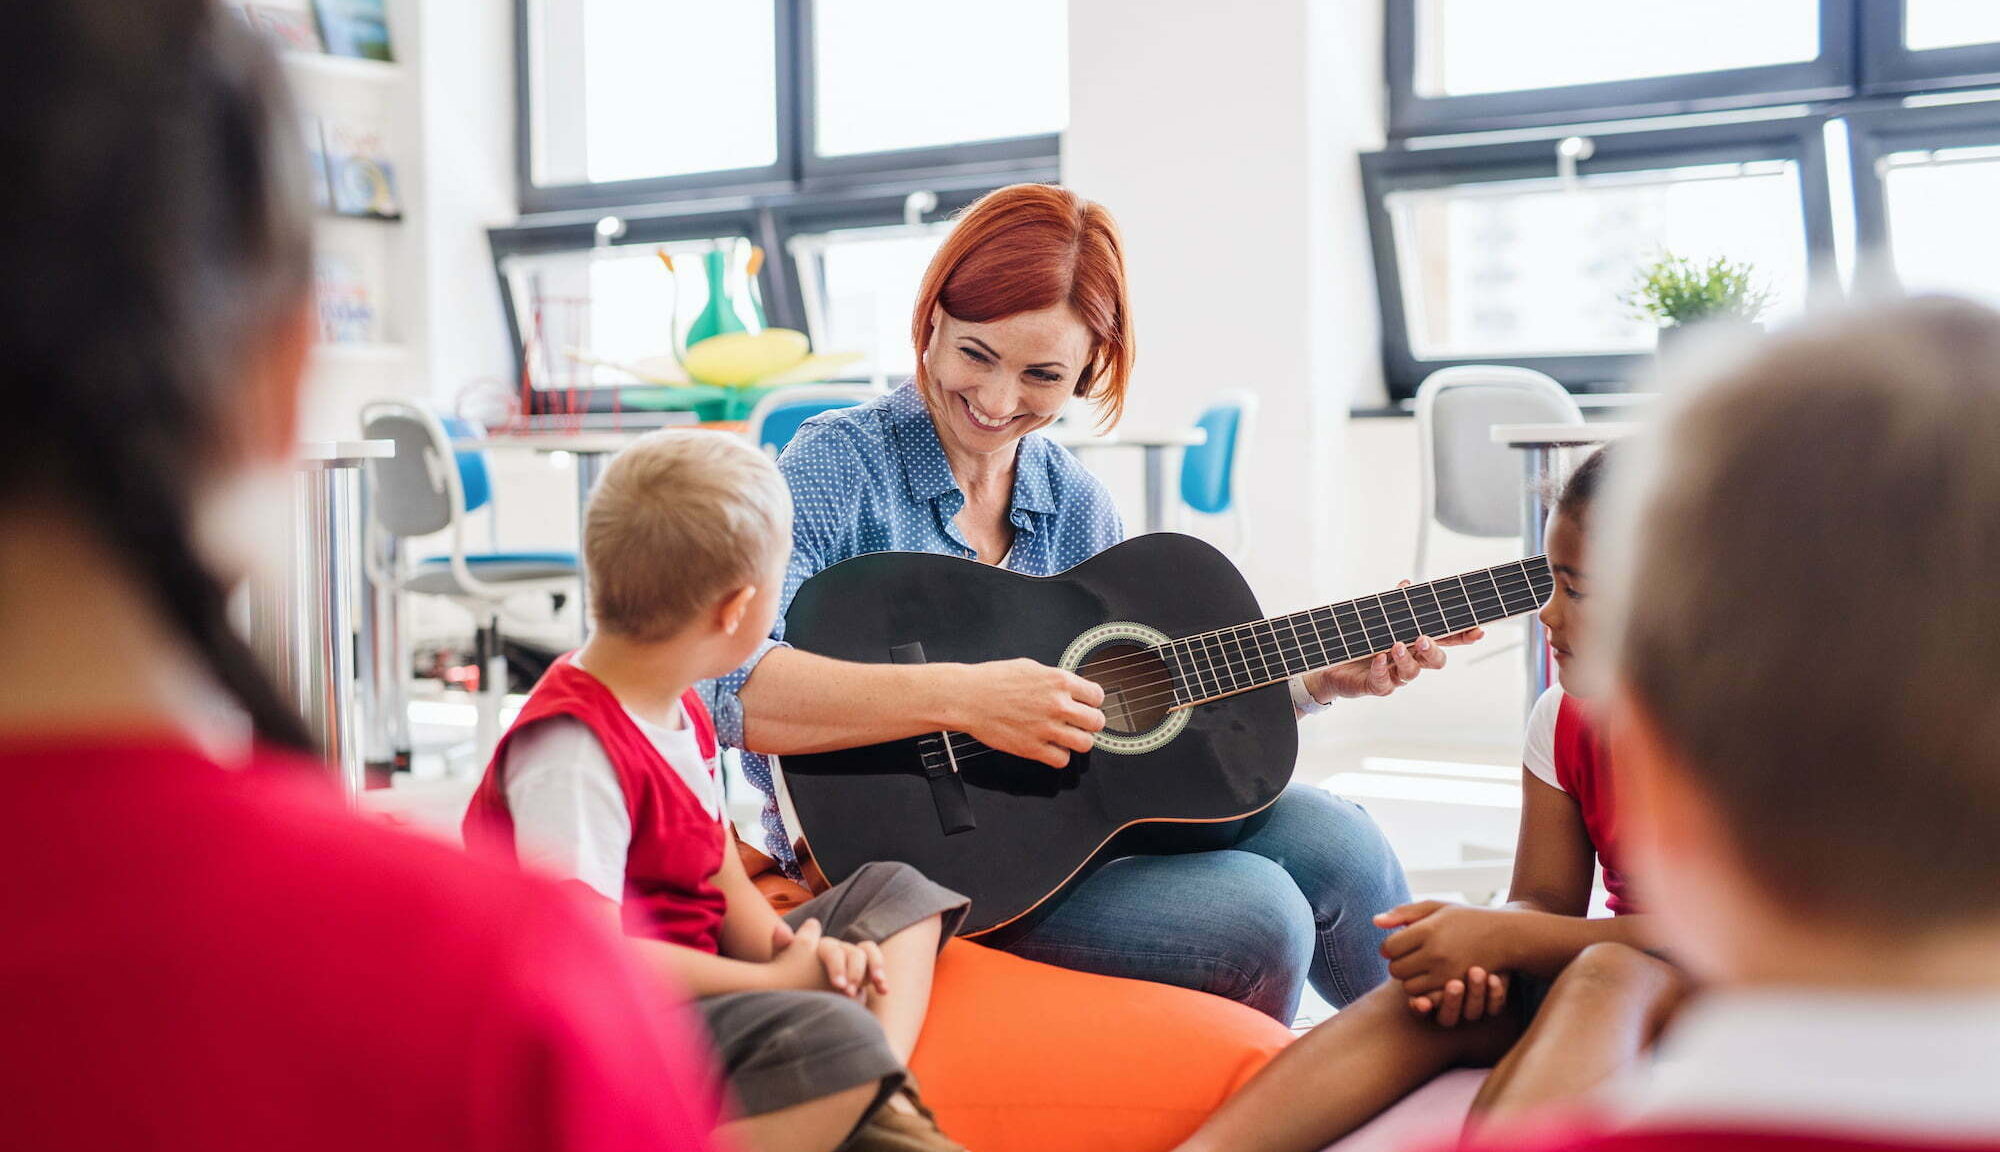 school kids and teacher with guitar sitting on the floor in class.